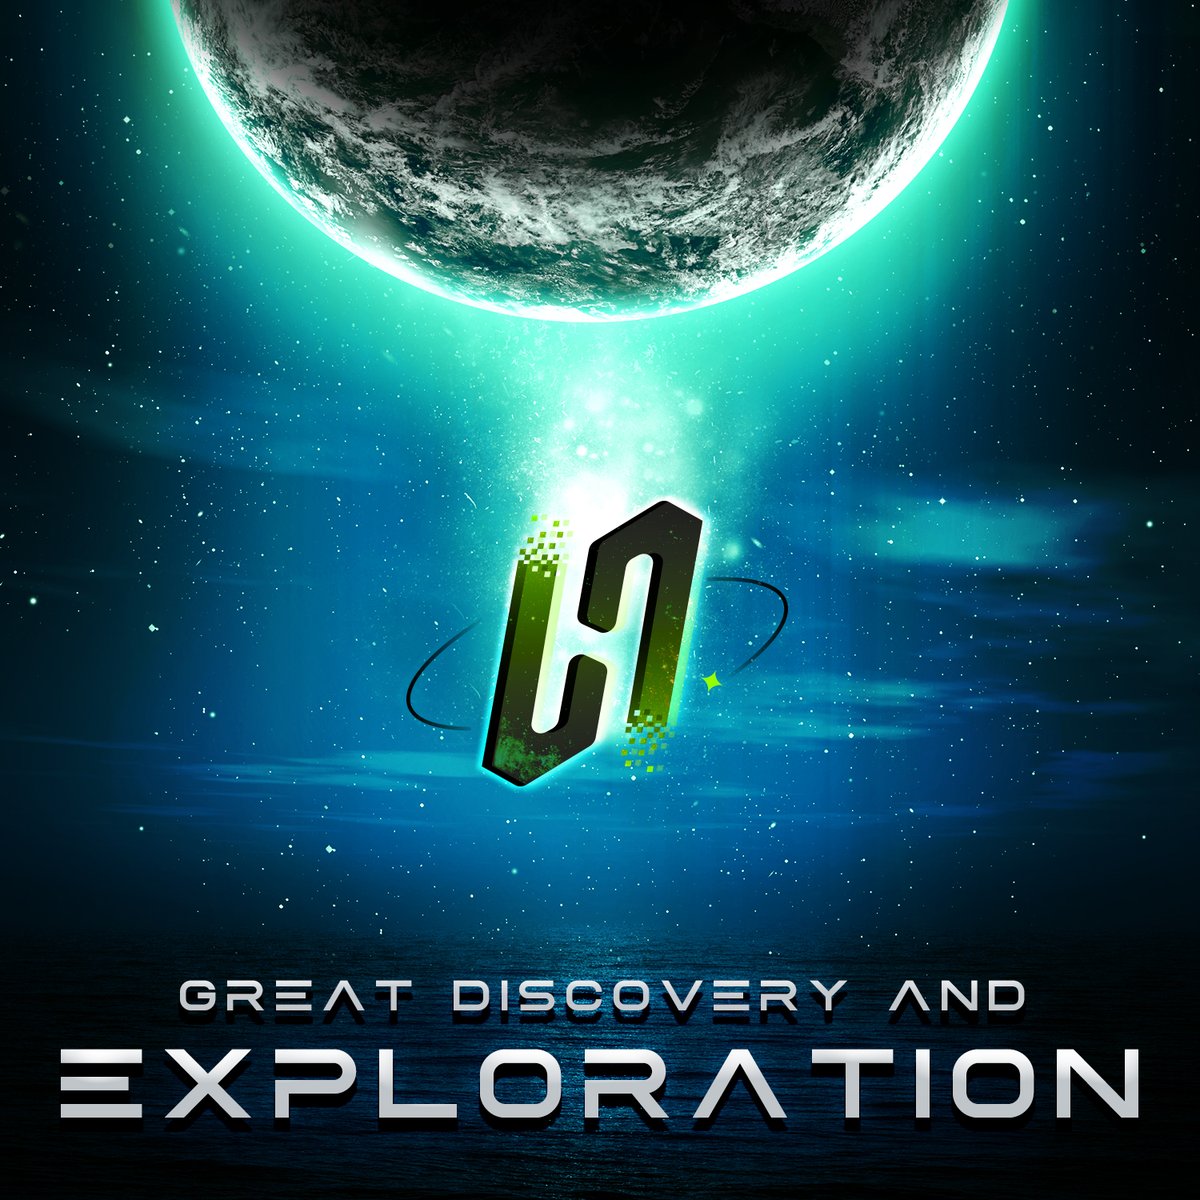 🚨We heard that the explorers have done a great discovery & exploration of this area. Gear up!🔧 #hyperverse #hypercosmos #hyperlab #hypercommunity #metaverse #blockchain #crypto #defi #dao #eth #btc